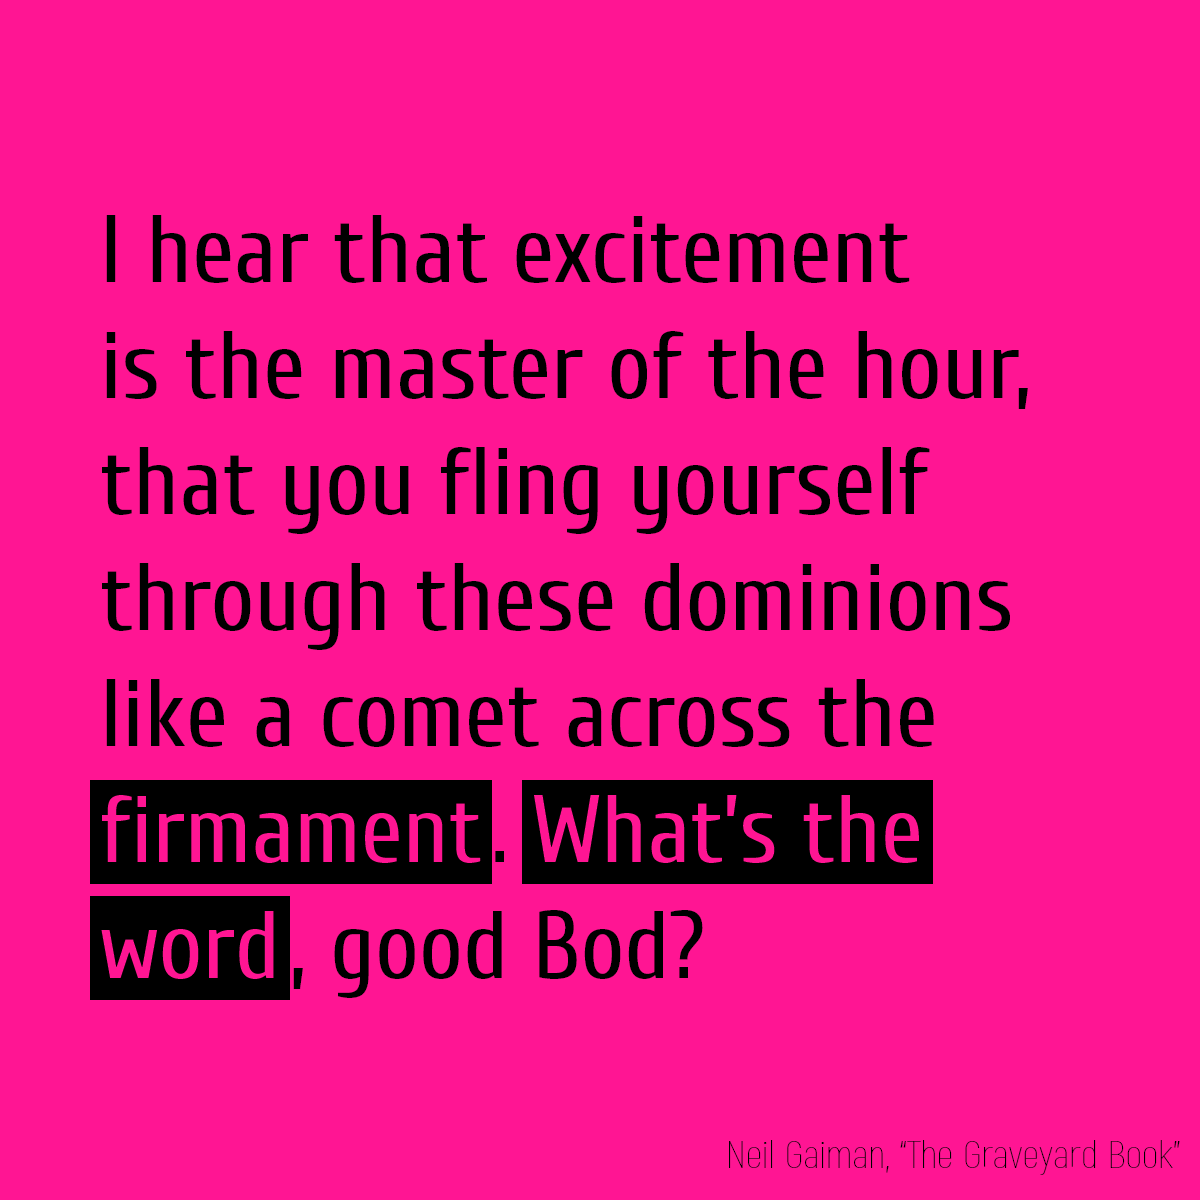 ‘I hear that excitement is the master of the hour, that you fling yourself through these dominions like a comet across the **firmament**. **What’s the word**, good Bod?’